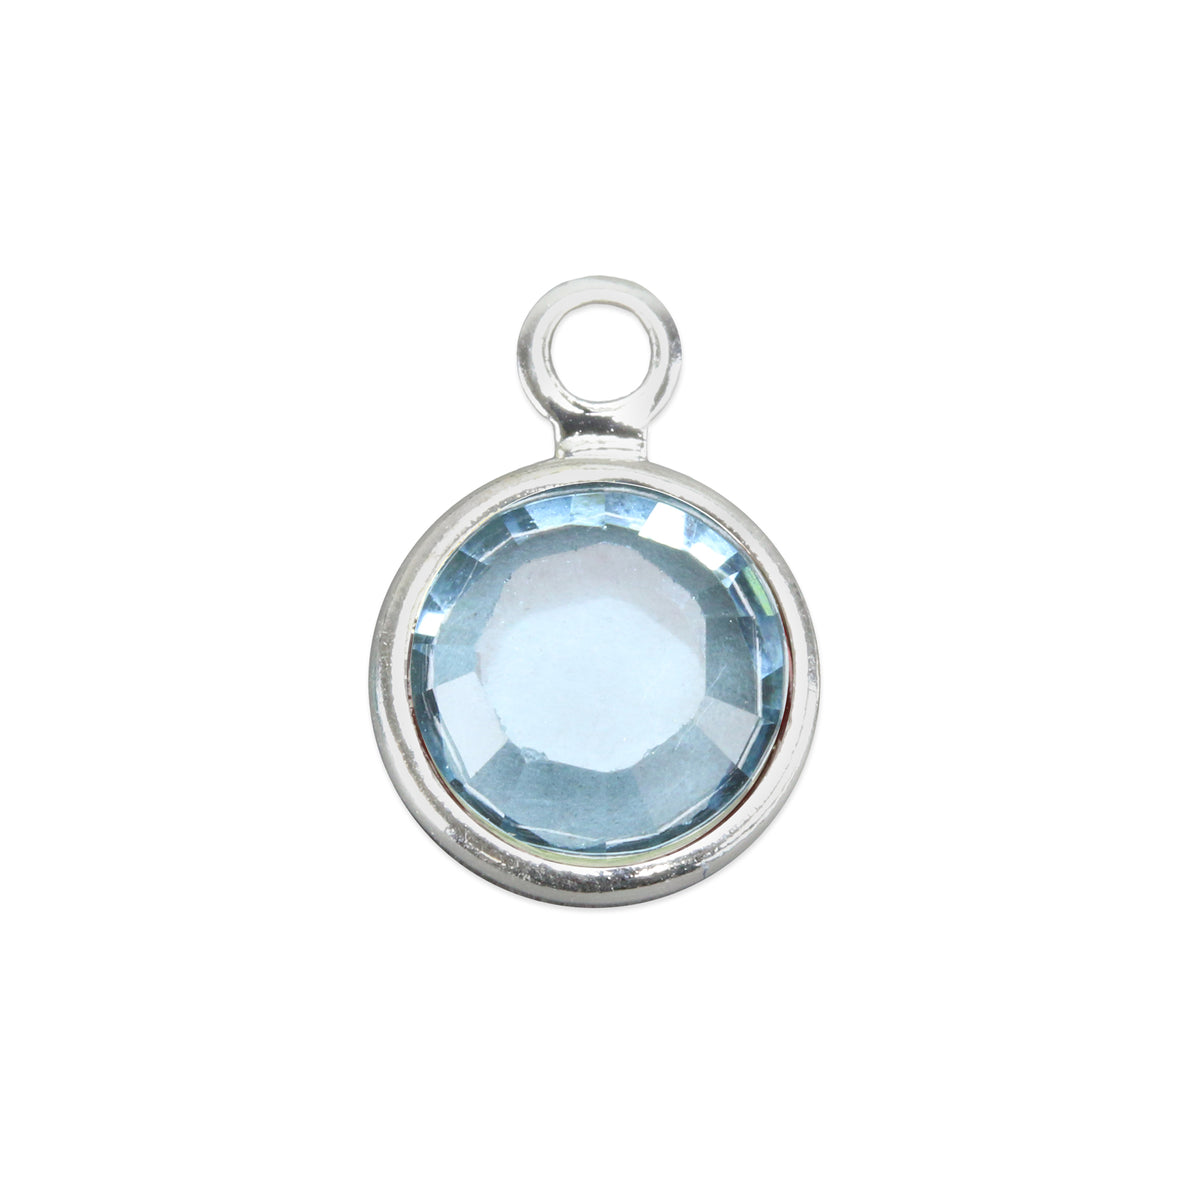 Crystal Channel Charm Birthstone Pack, 6mm Stone, Pack of 96